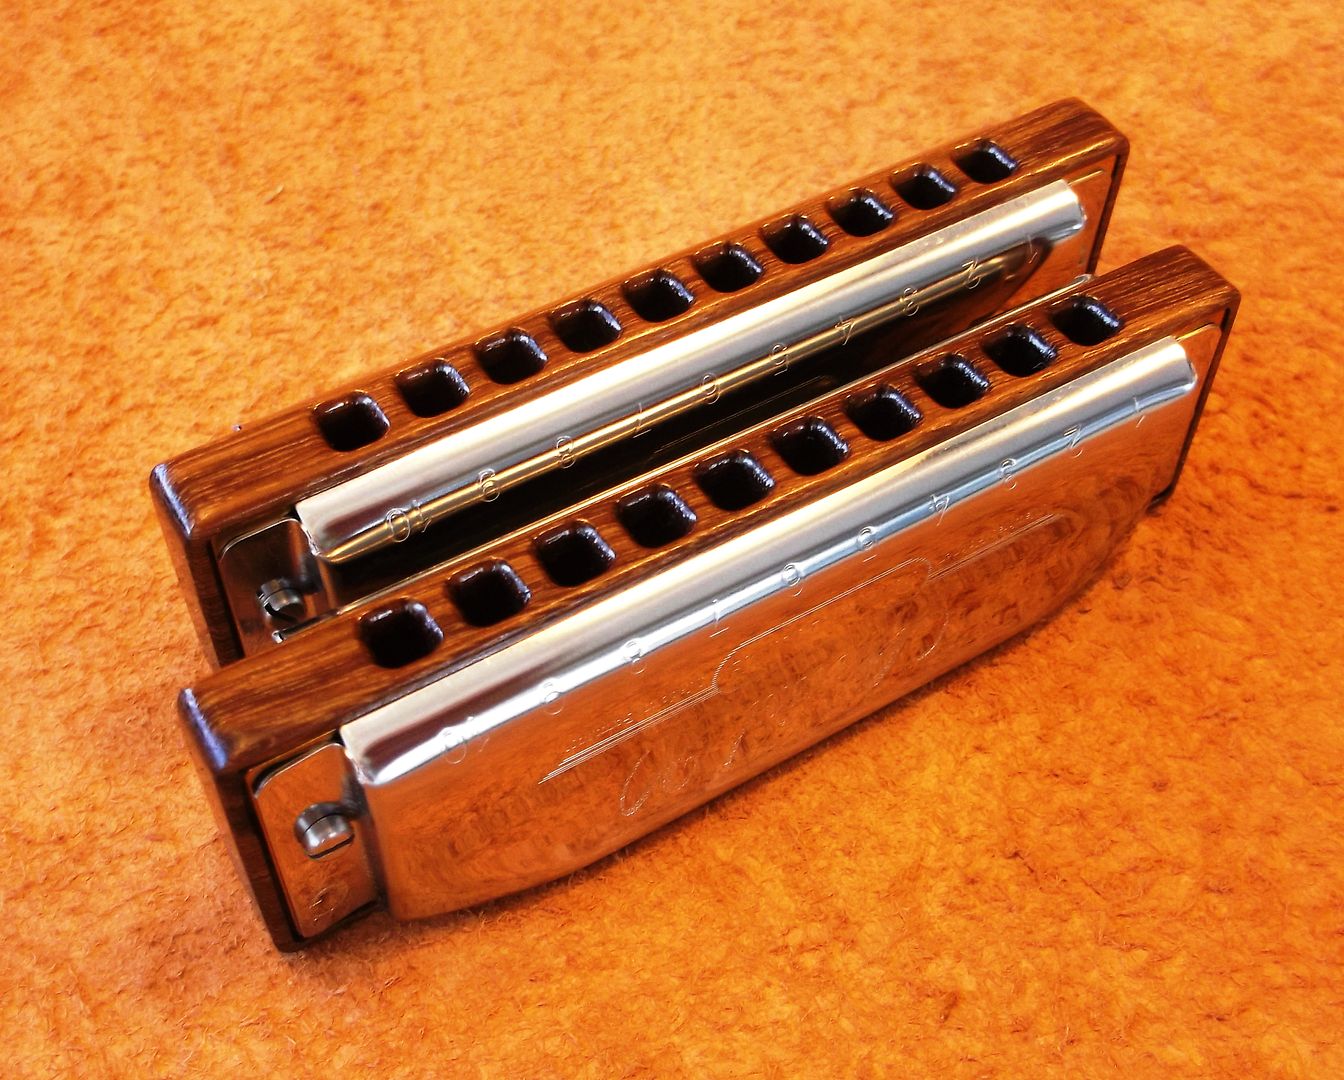 Hohner Special 20's with Milled Rosewood Combs photo DSCF4568_zpskgks3hpt.jpg